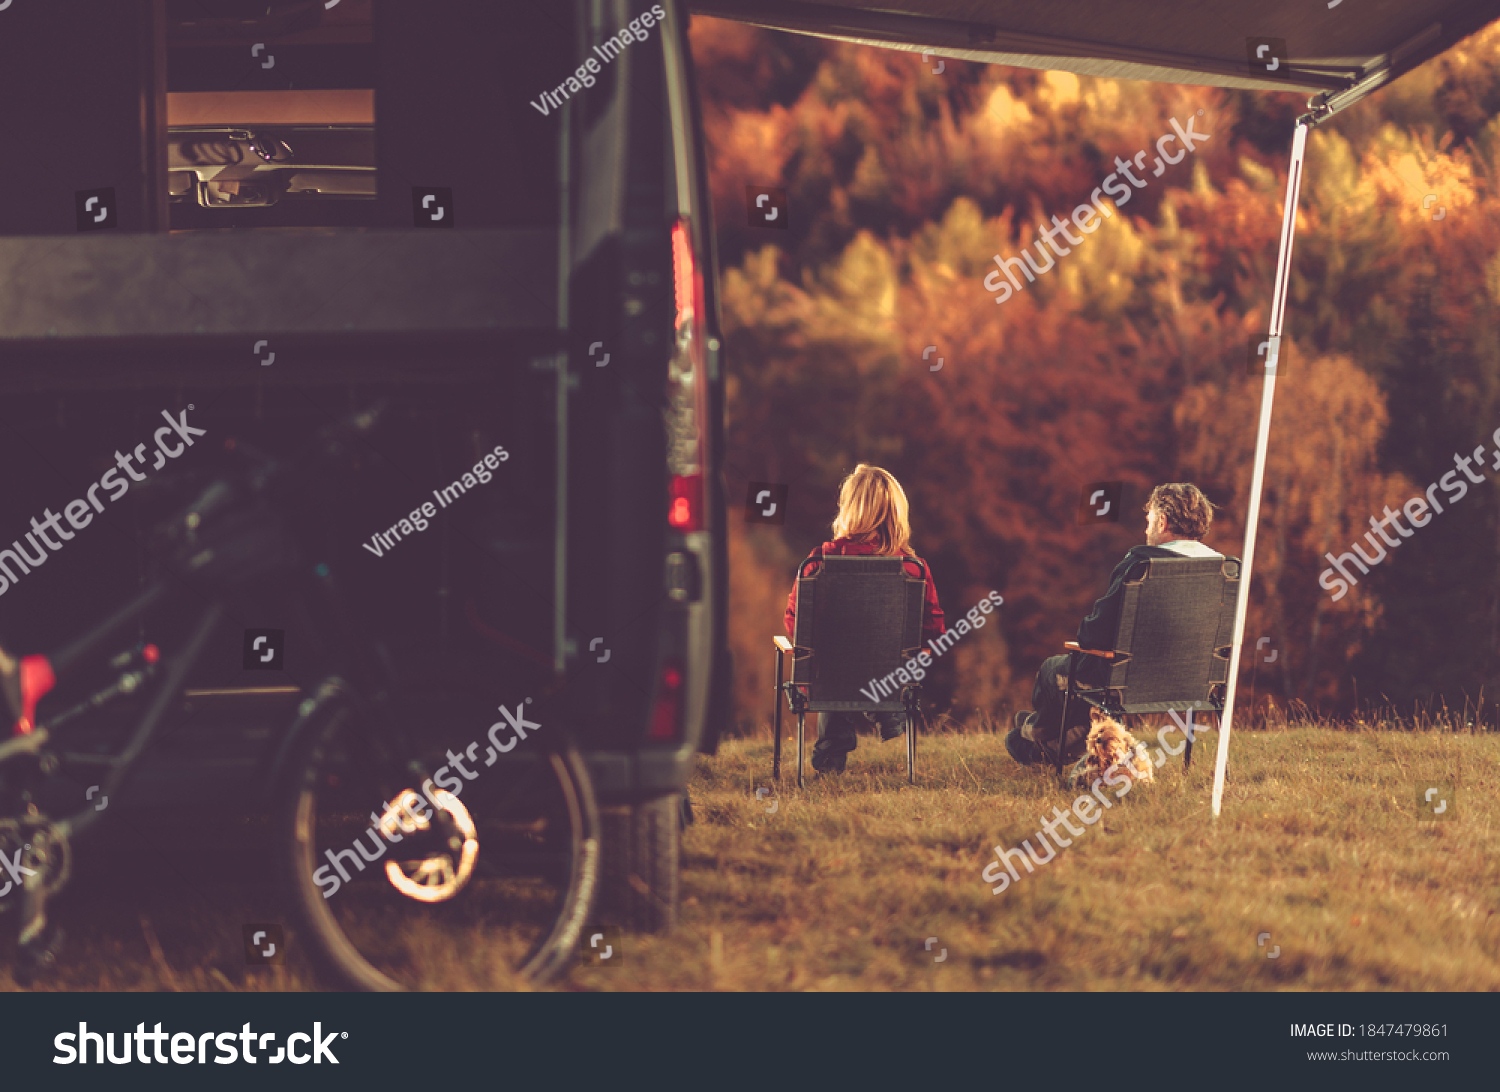 Scenic Fall Foliage RV Camper Camping. Caucasian Couple Seating Next to Their Motorhome and Enjoying the Scenery. Campsite Pitch. #1847479861